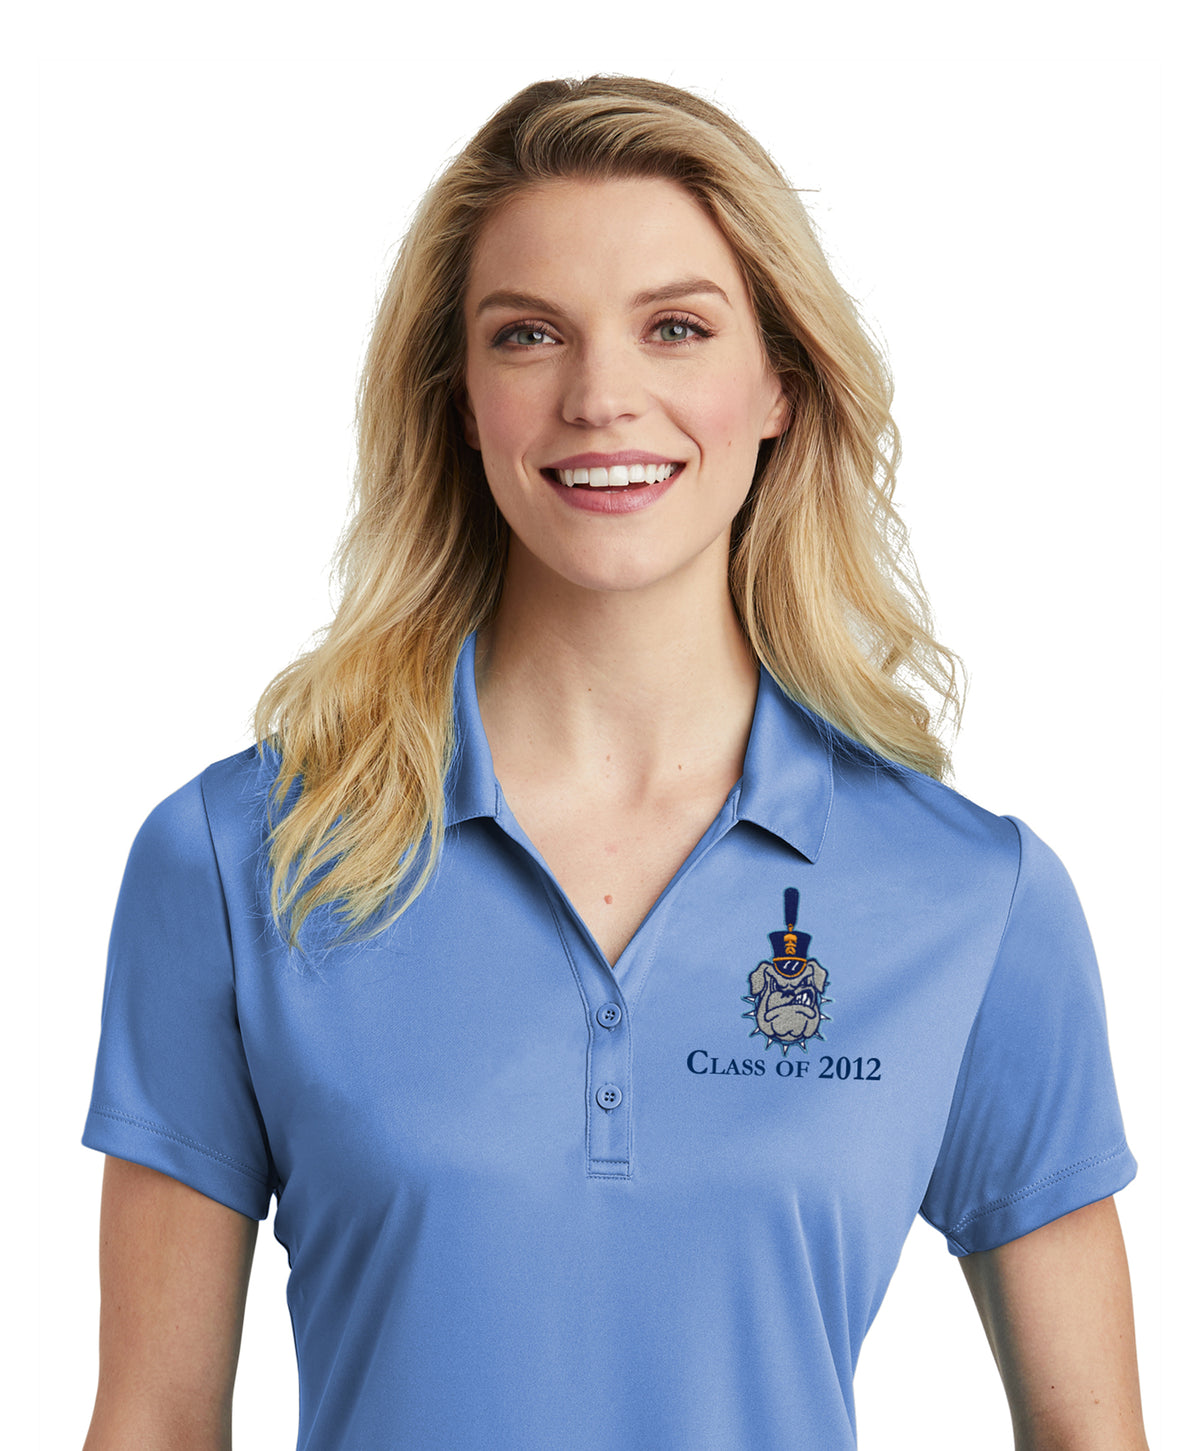 The Citadel, Class of 2012, Spike Logo Ladies Performance Polo